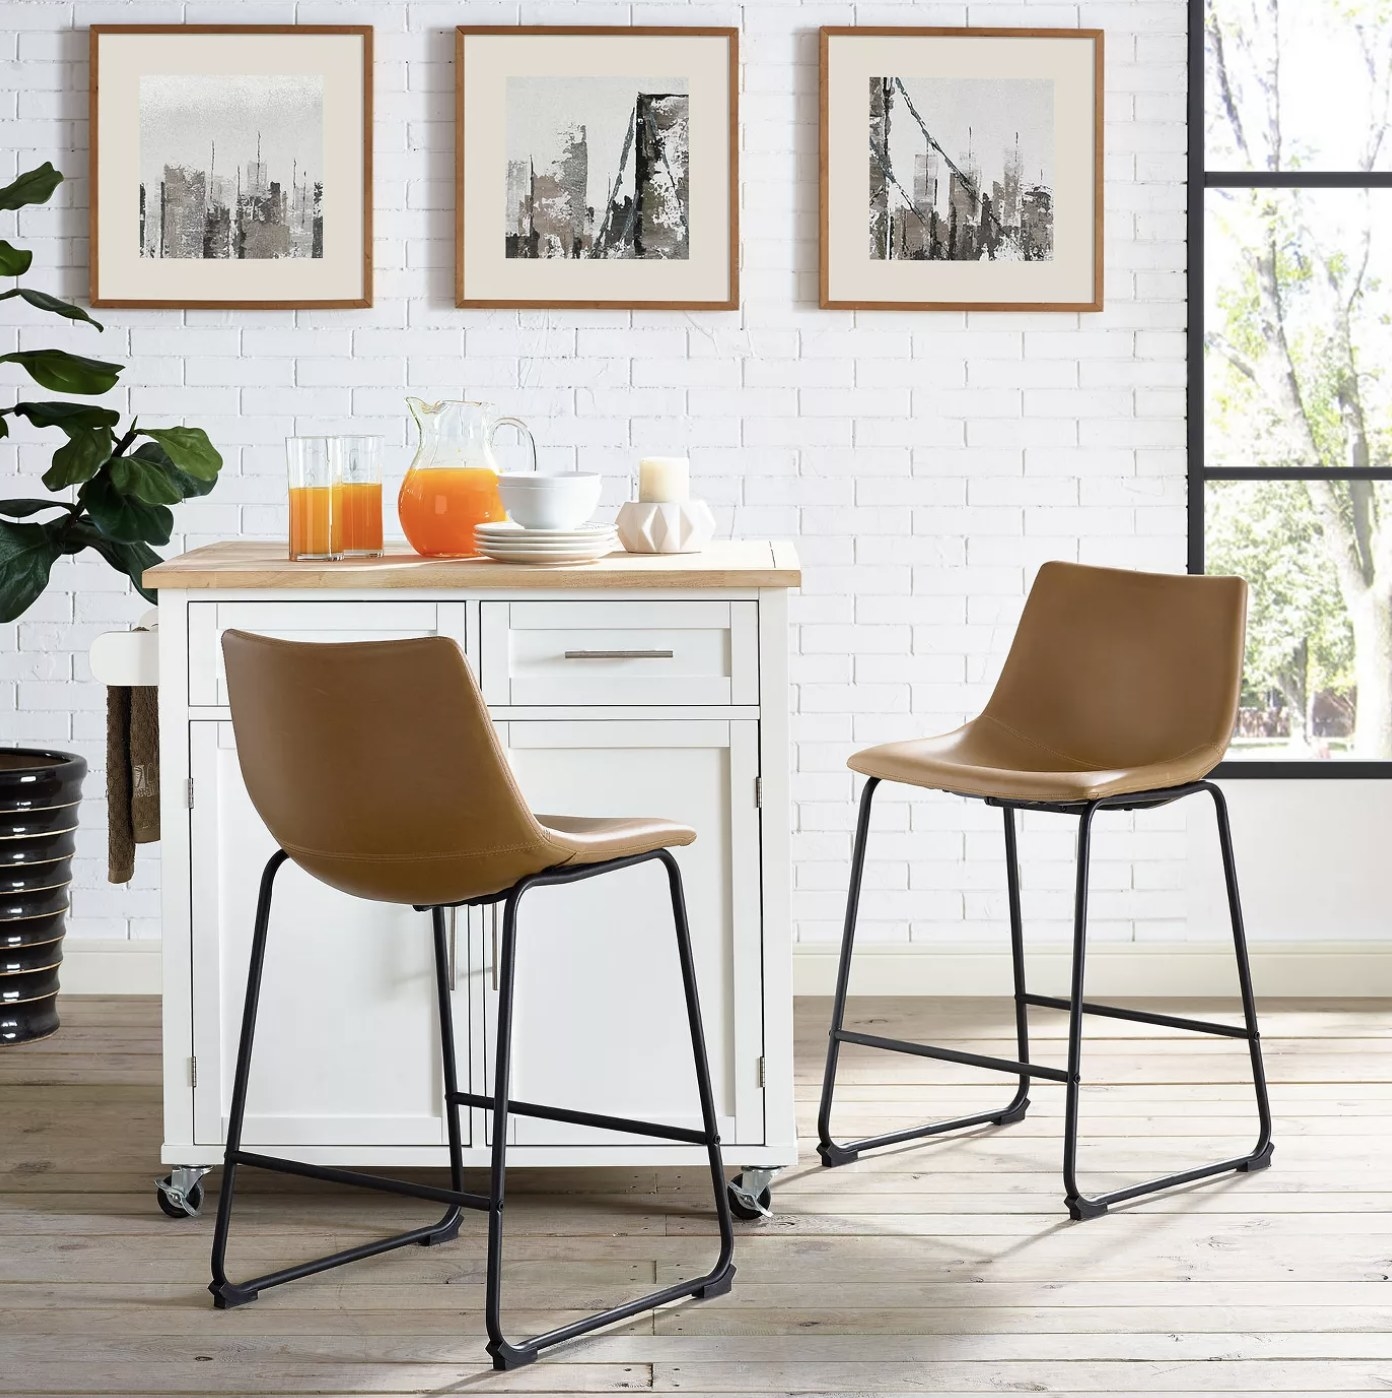 Two brown faux leather barstools